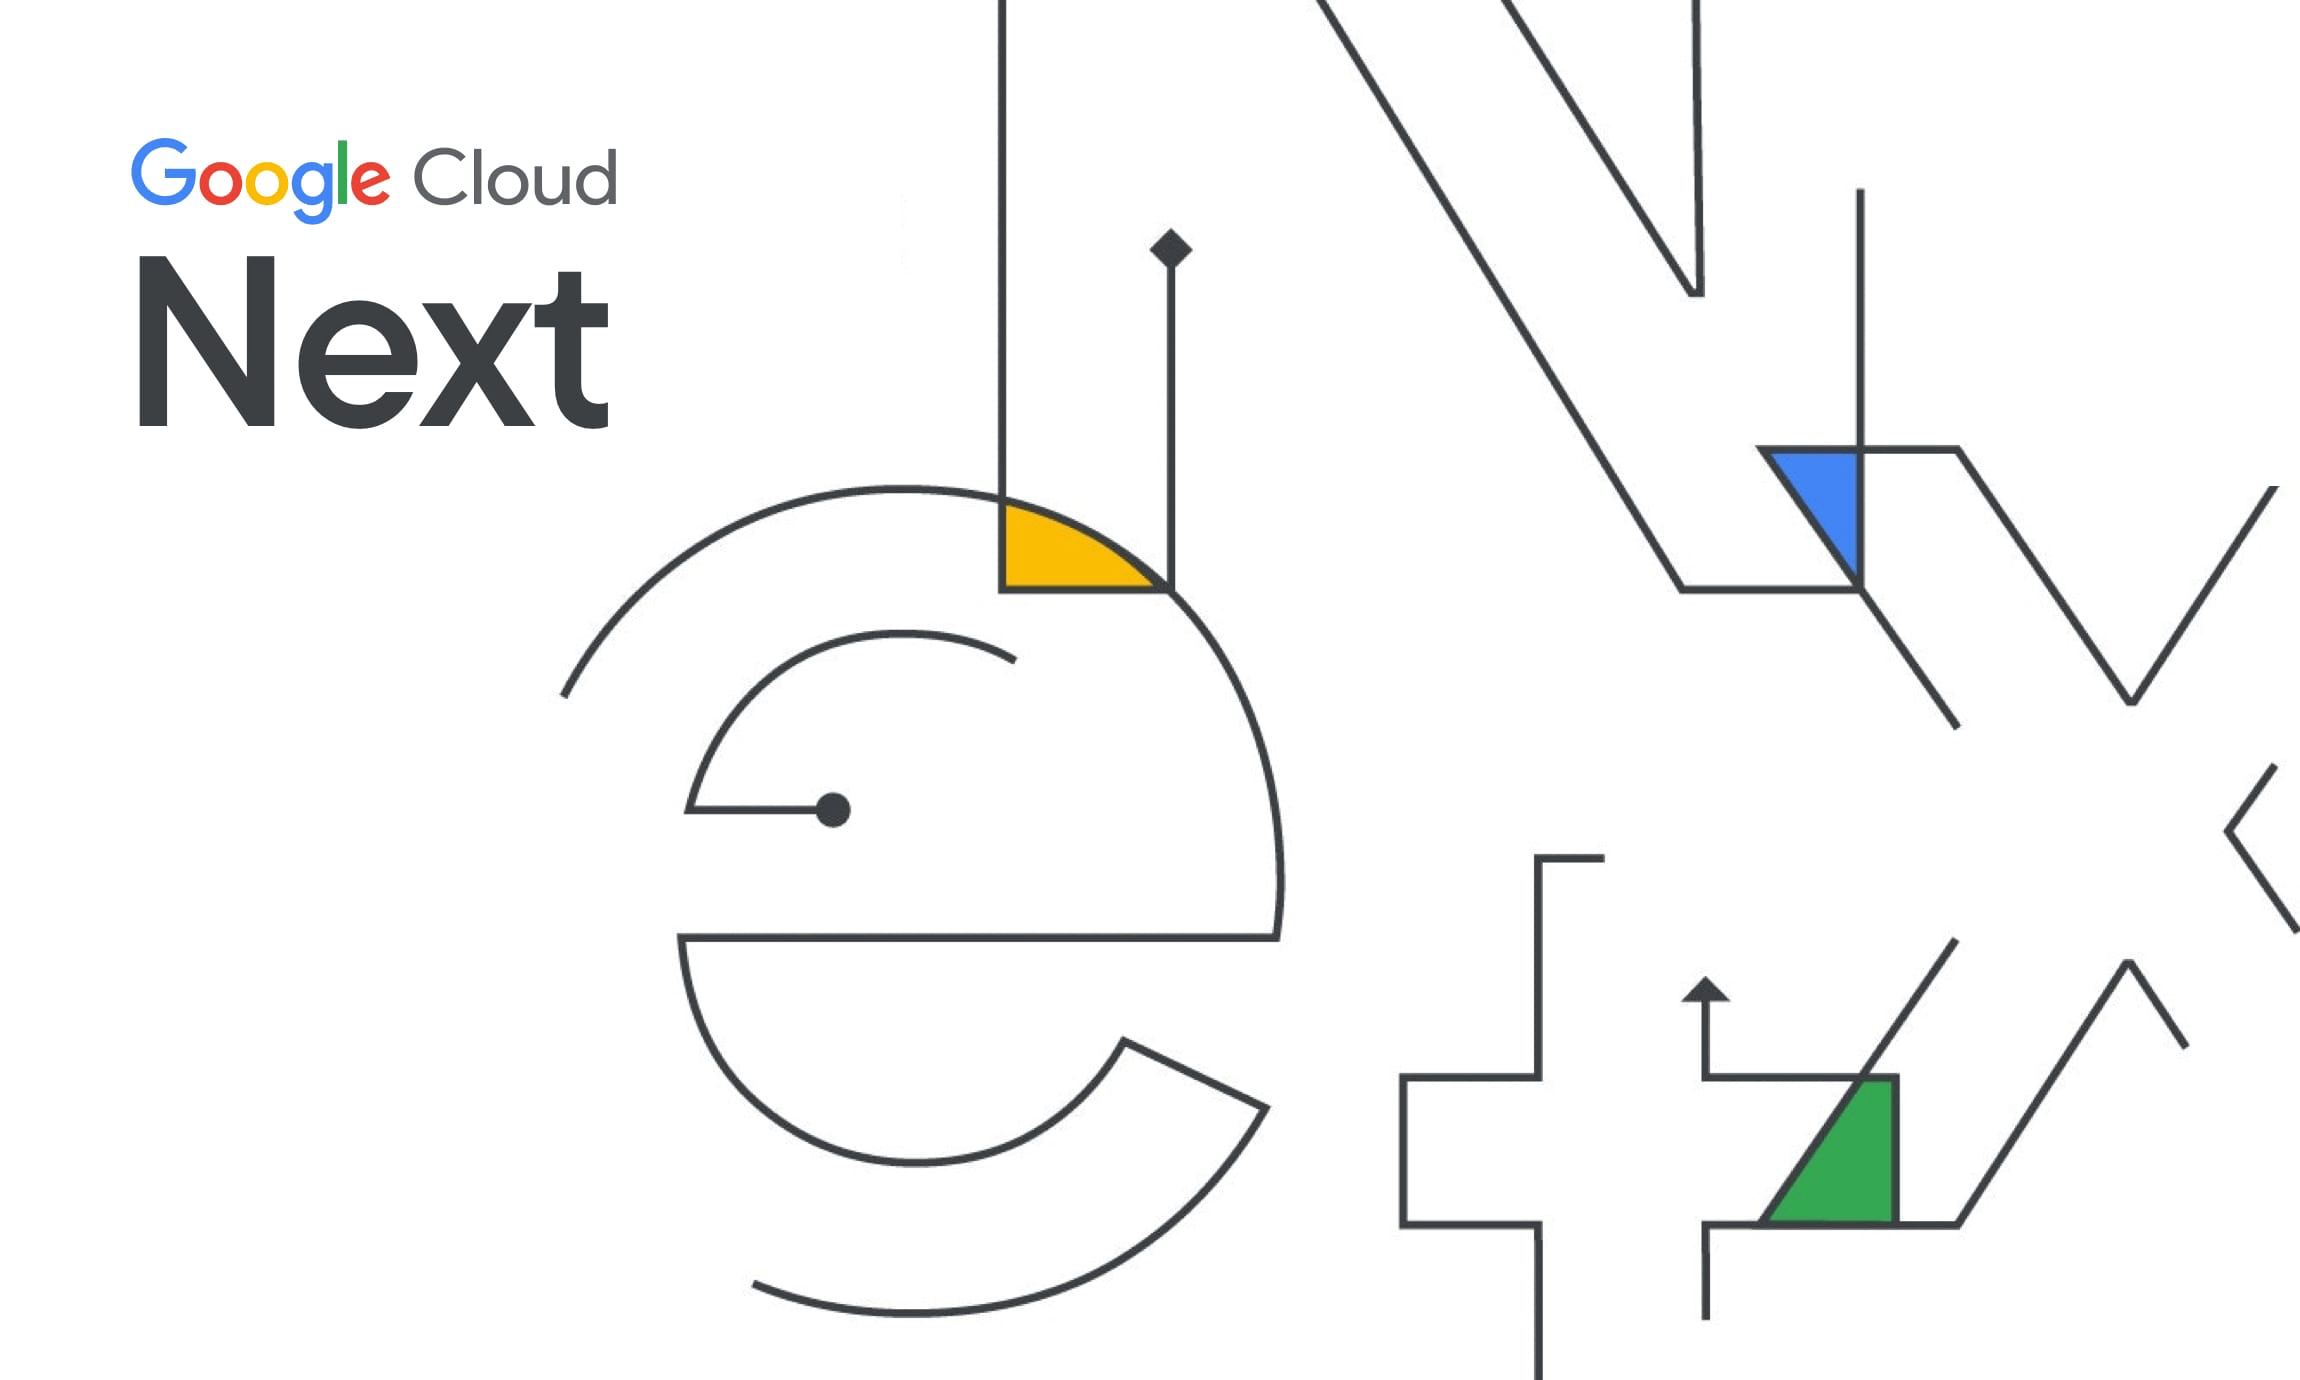 How to solve retail’s biggest challenges with commercetools, Quantum Metric and Google Cloud